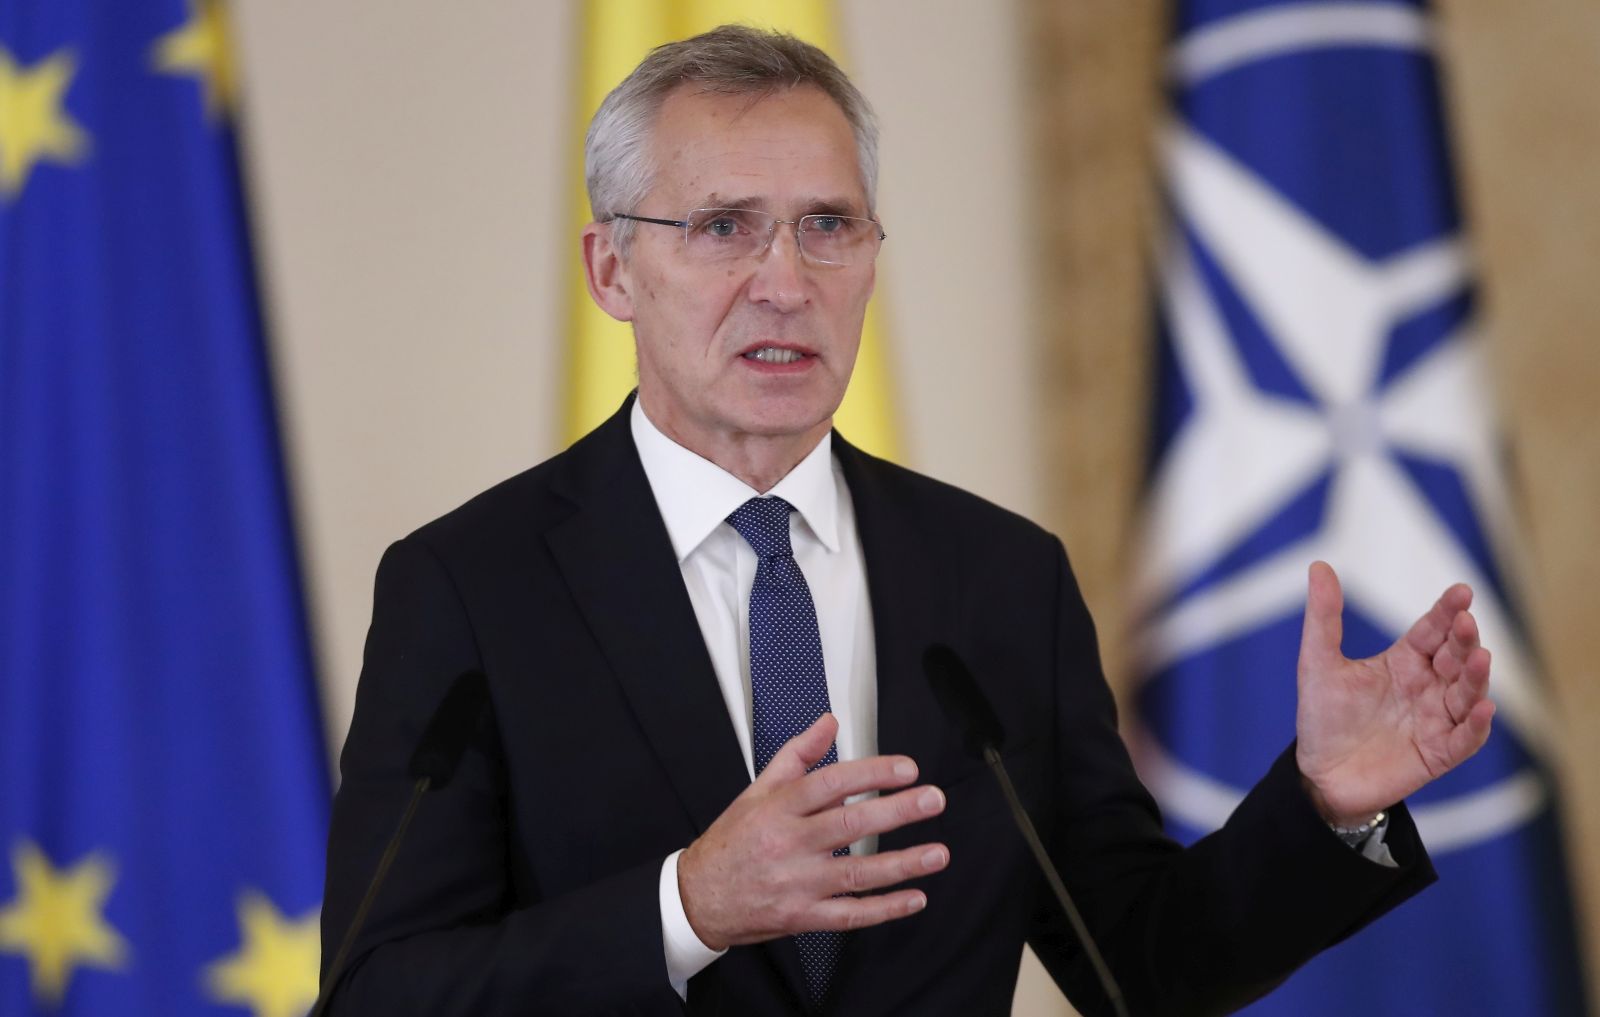 epa10334678 NATO Secretary General Jens Stoltenberg speaks at a press conference at the end of a meeting with Romanian President Klaus Iohannis at Cotroceni Presidential Palace in Bucharest, Romania 28 November 2022. Foreign Ministers from 30 NATO countries will gather in Romania's capital on 29-30 November 2022 to tackle Russia’s invasion in Ukraine, NATO’s support for Kyiv administration and regional partners and to find new ways to strengthen the Eastern flank of the alliance.  EPA/ROBERT GHEMENT